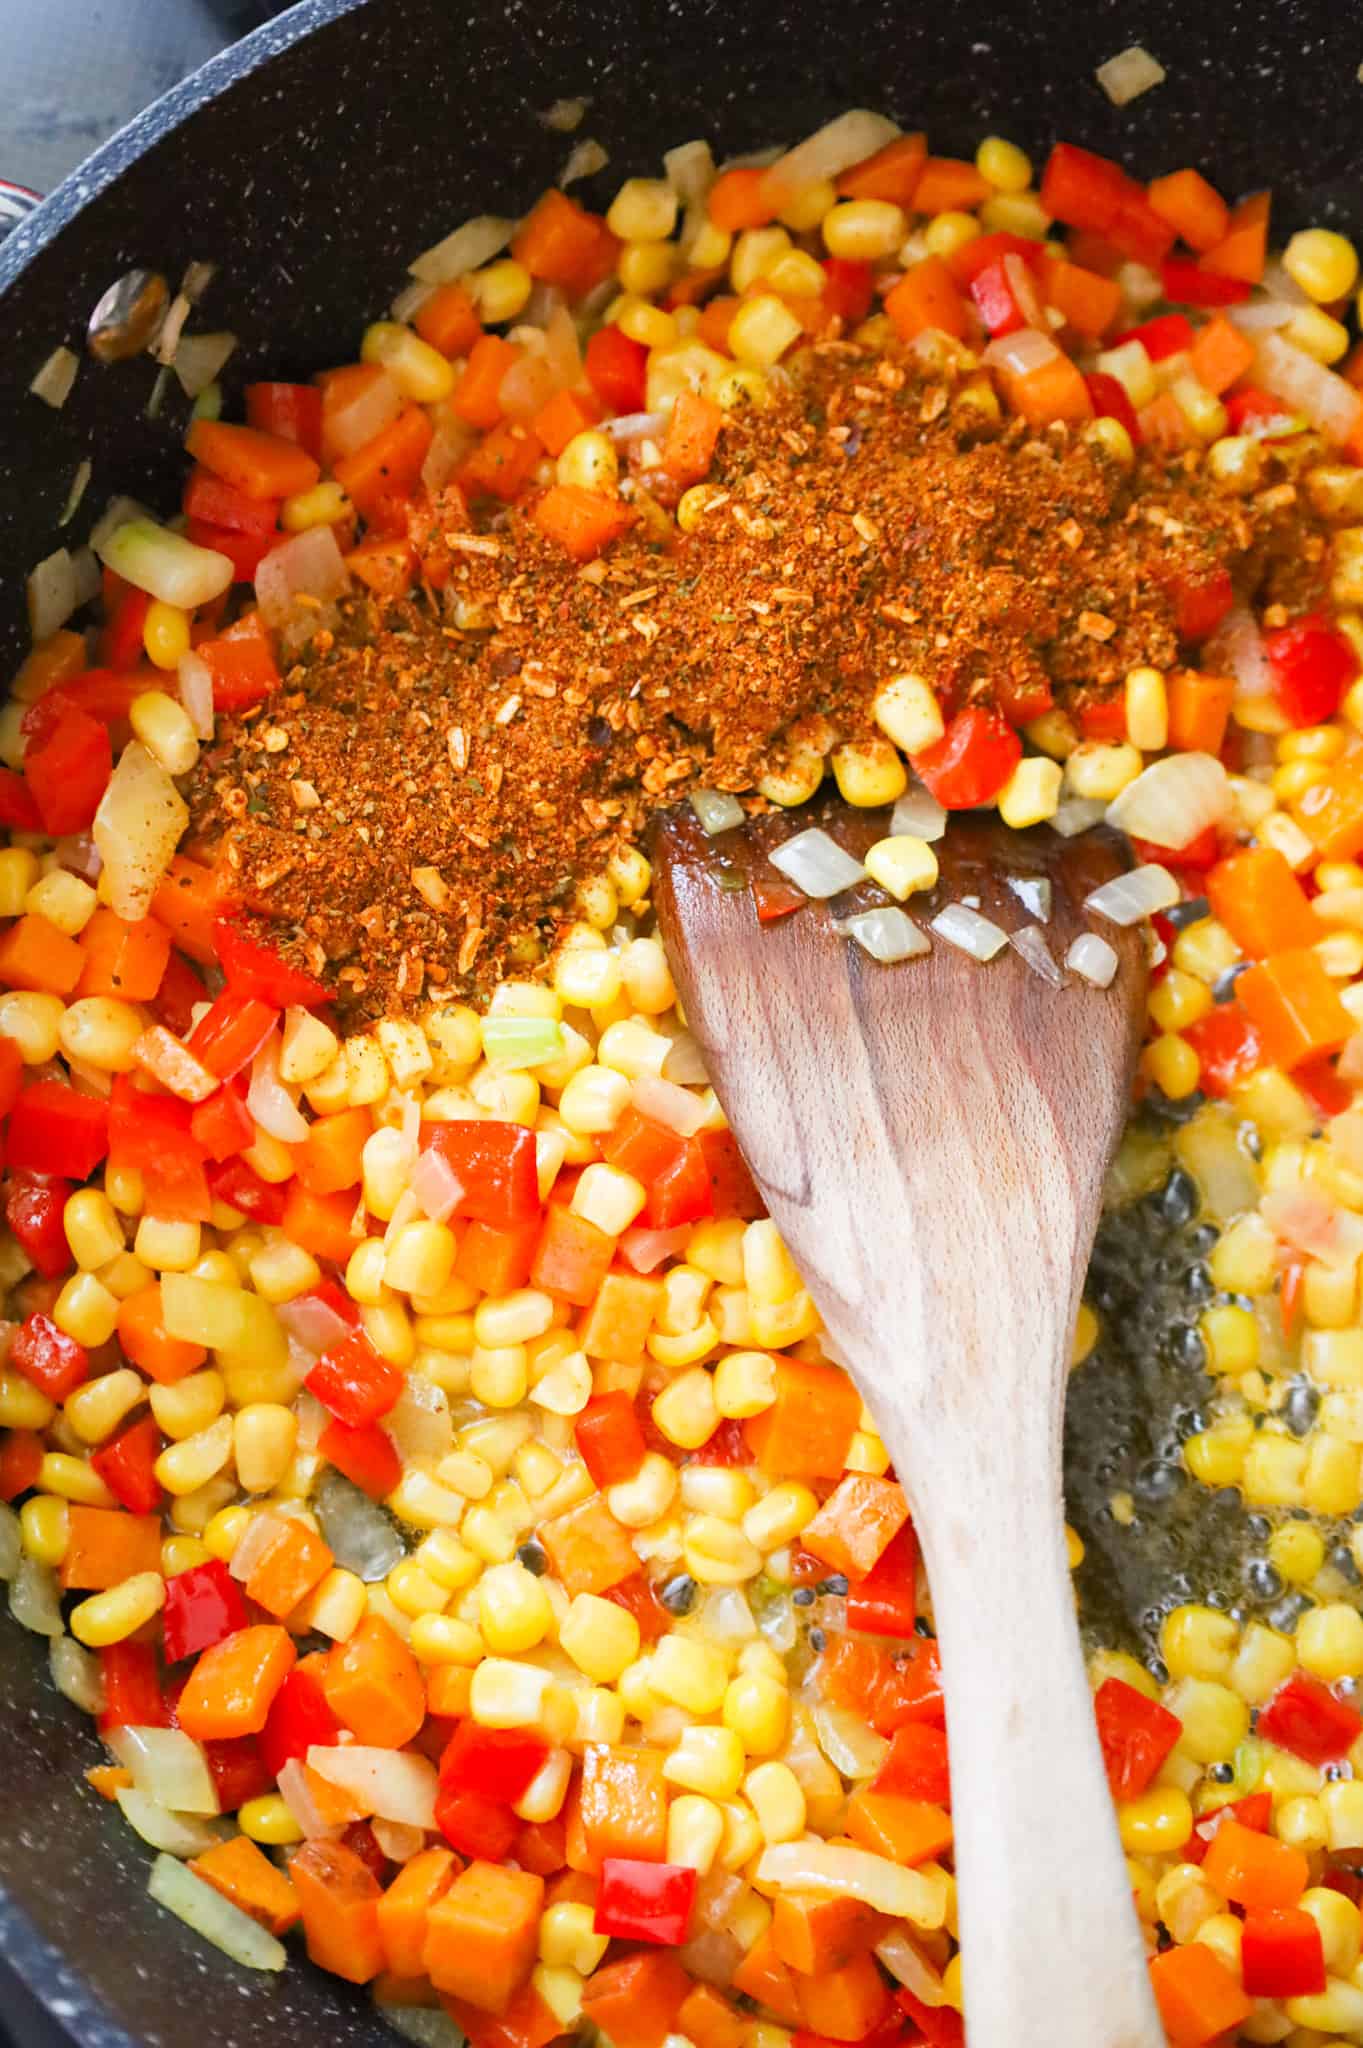 Cajun seasoning added to skillet with corn, diced peppers, diced onions and sweet potatoes